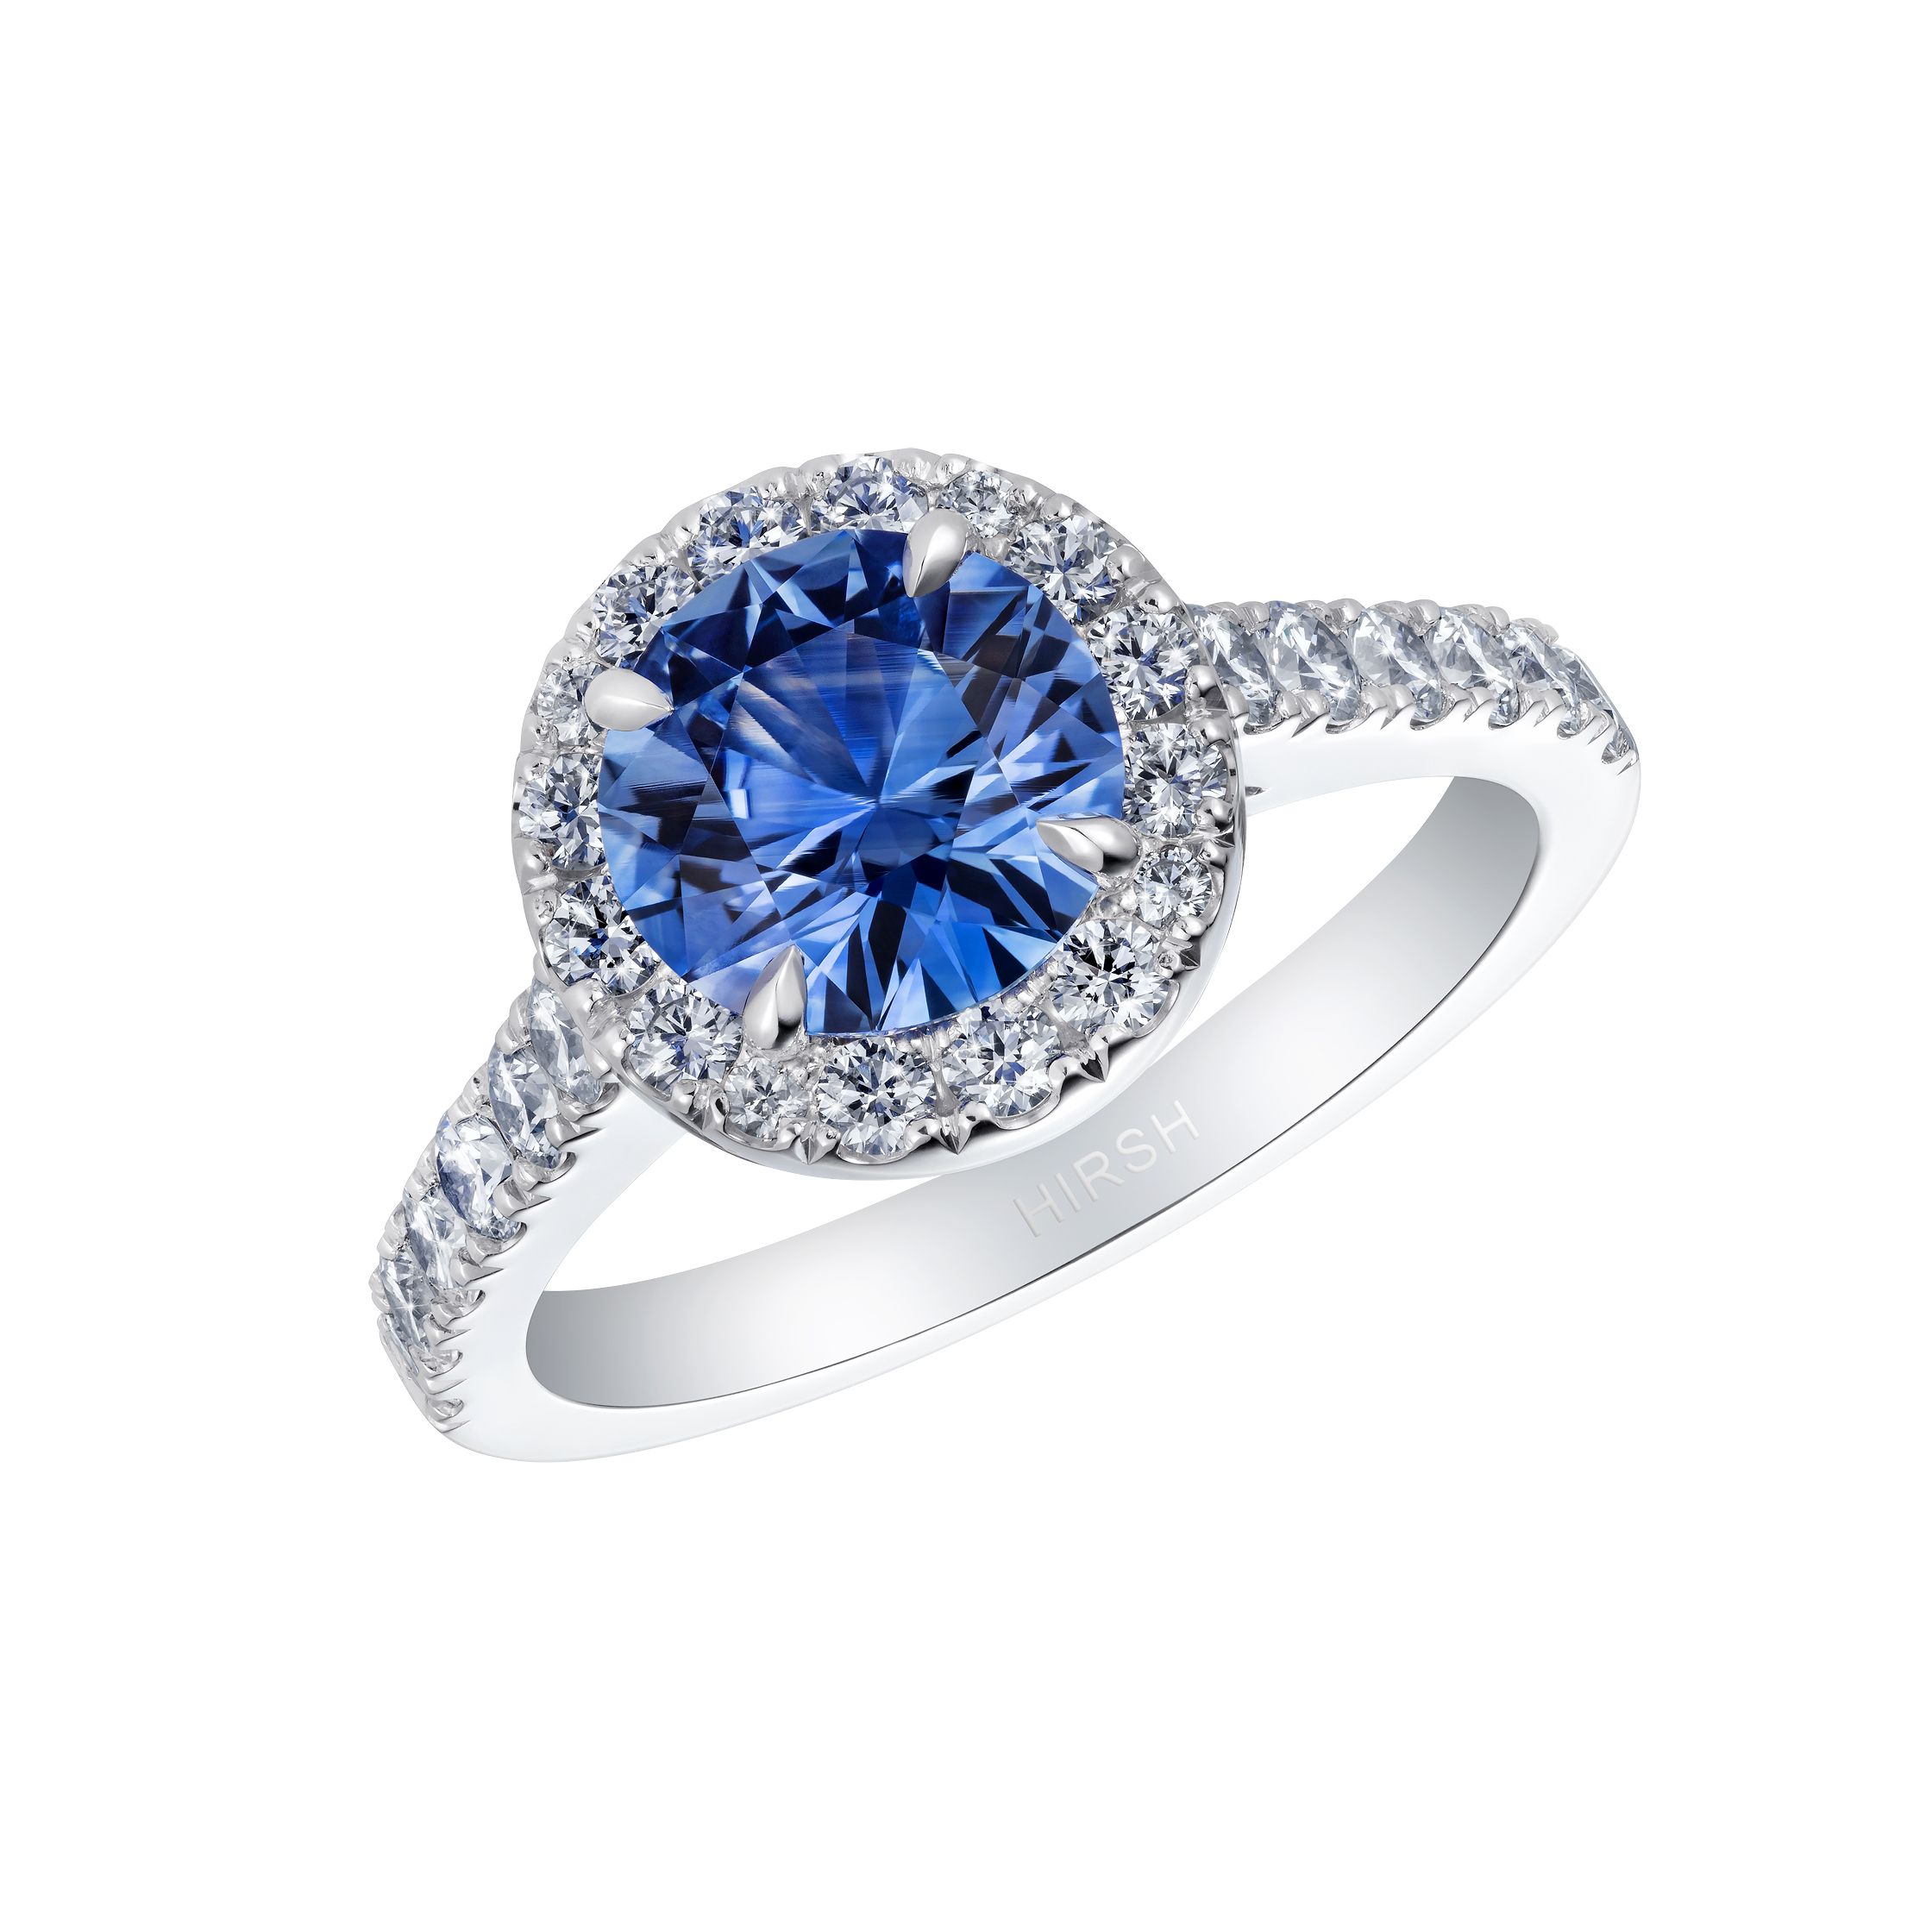 Buy Silver & Blue Rings for Women by Ornate Jewels Online | Ajio.com